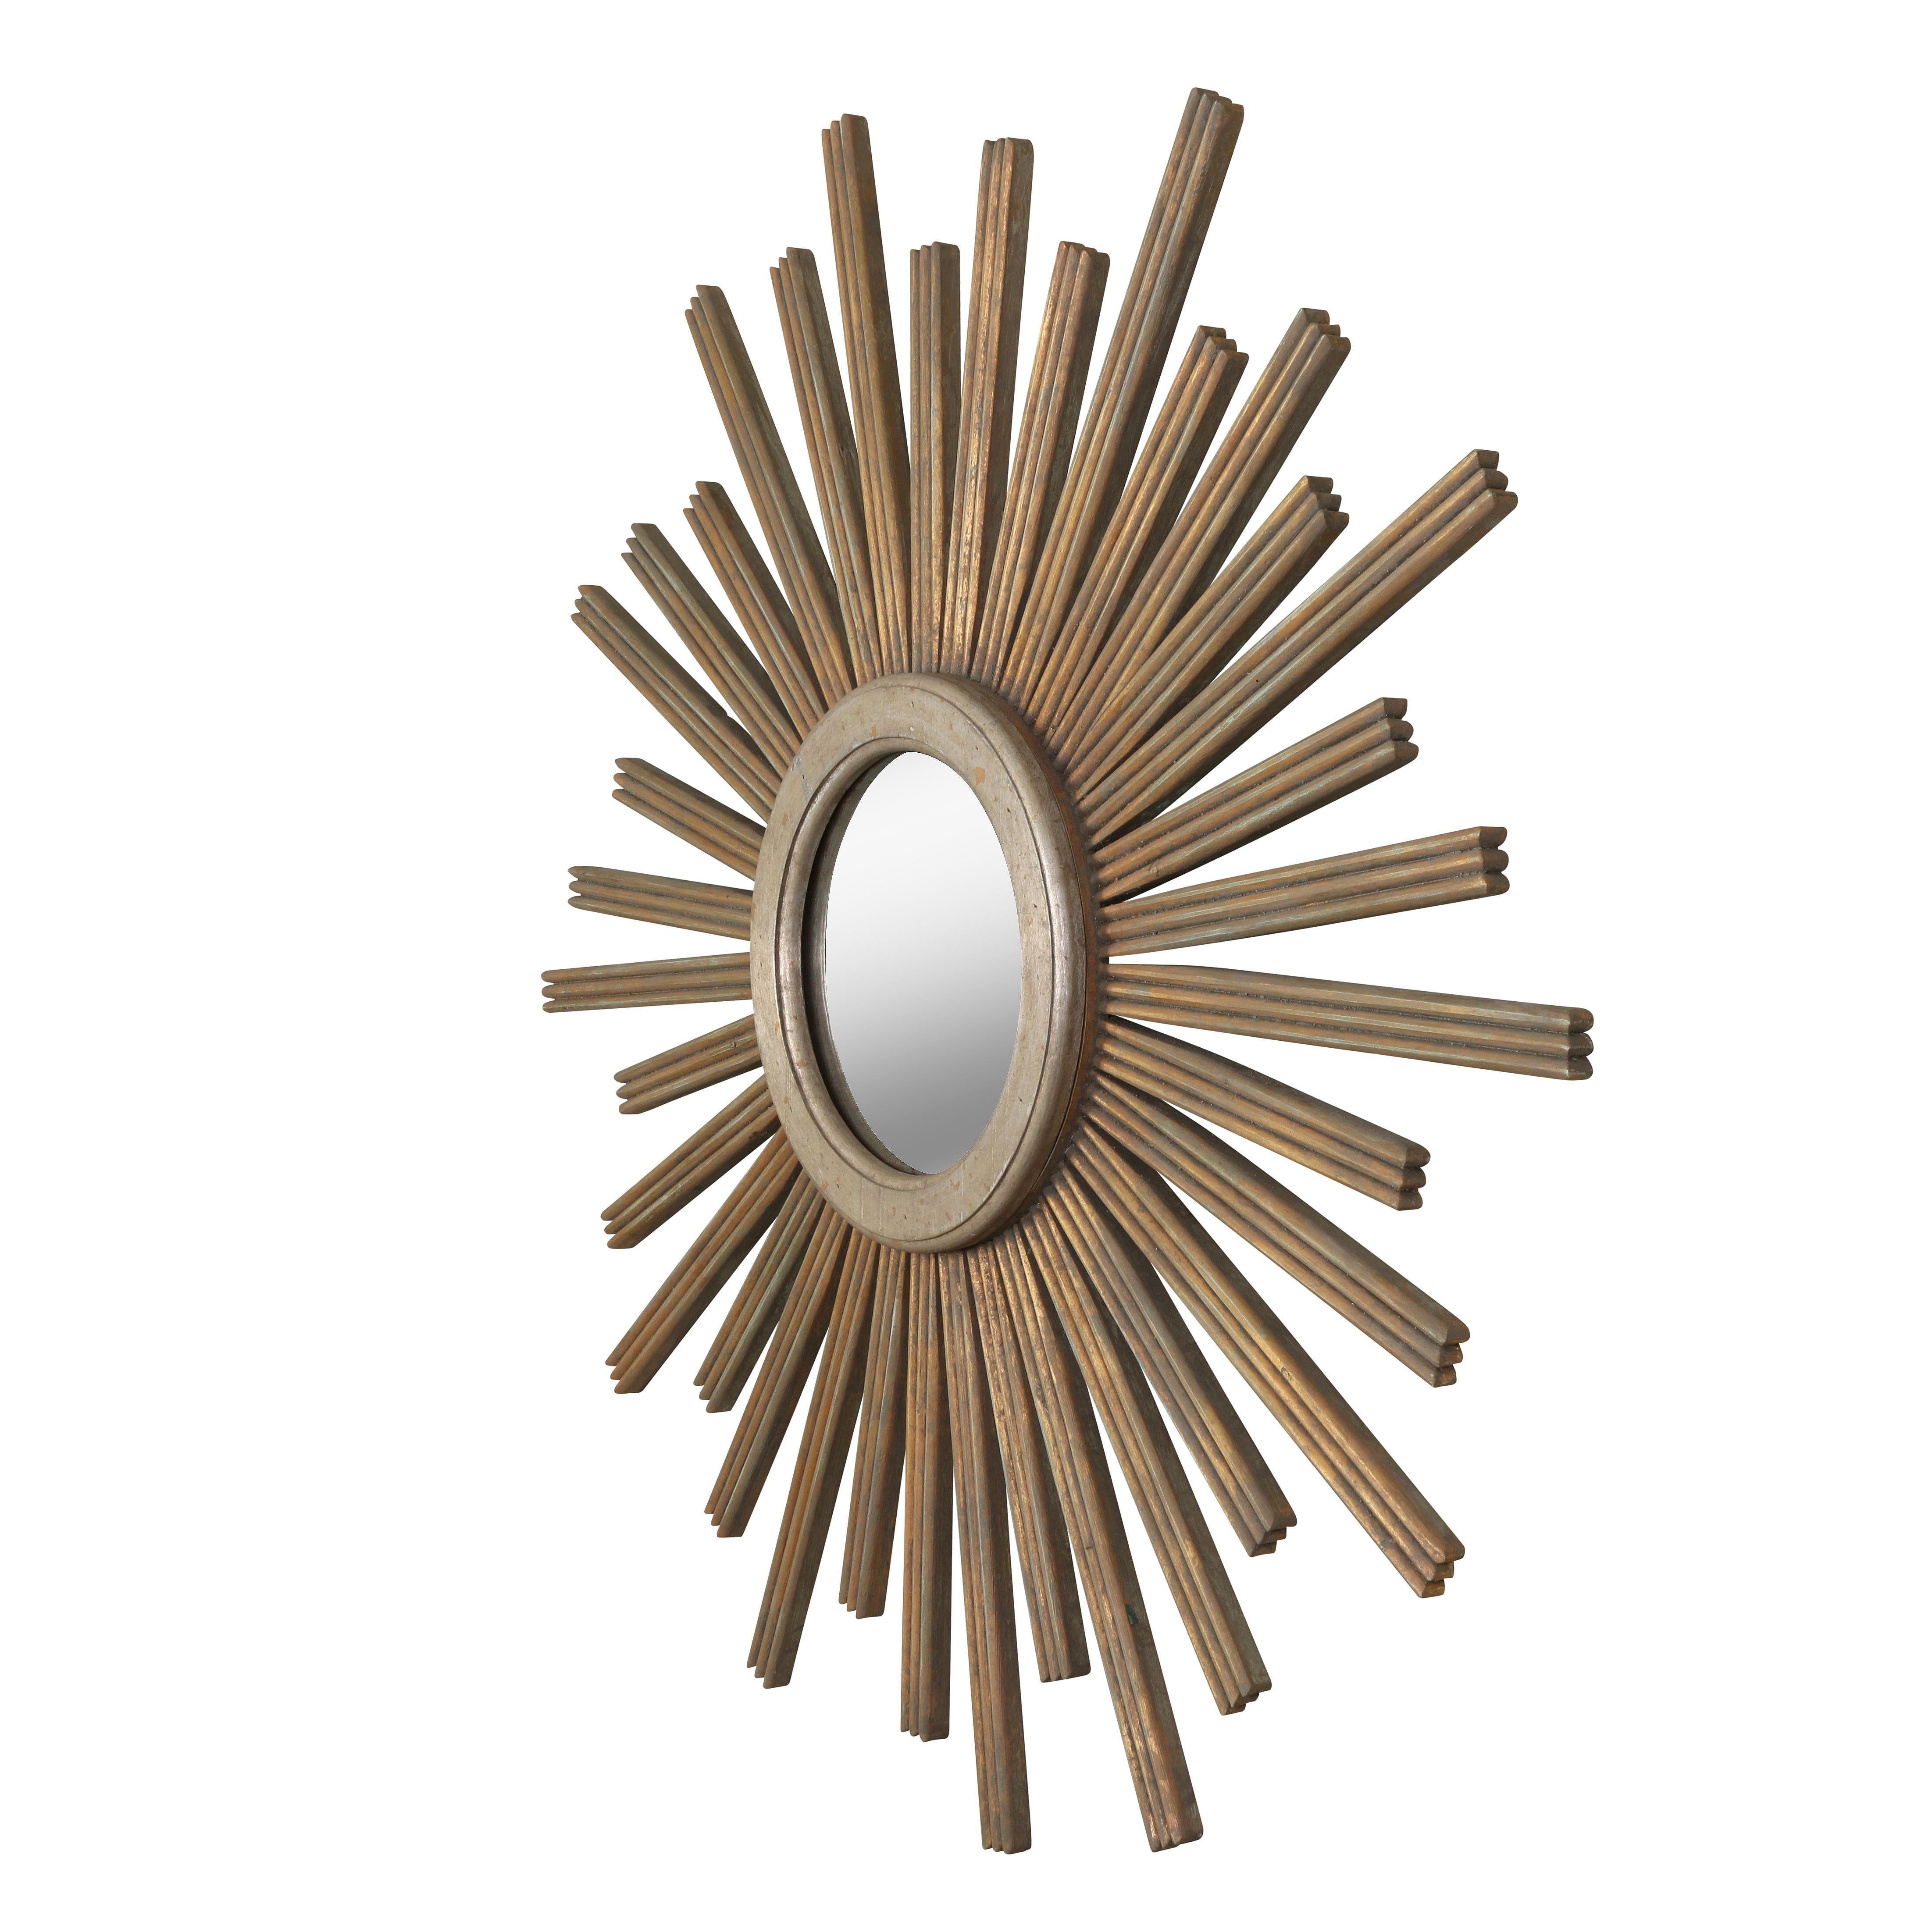 This large sunburst mirror will add a bit of drama and whimsy to any space.  Constructed of wood with a molded center ring,  he mirror has a painted/washed finish with subtle gold leaf accents.